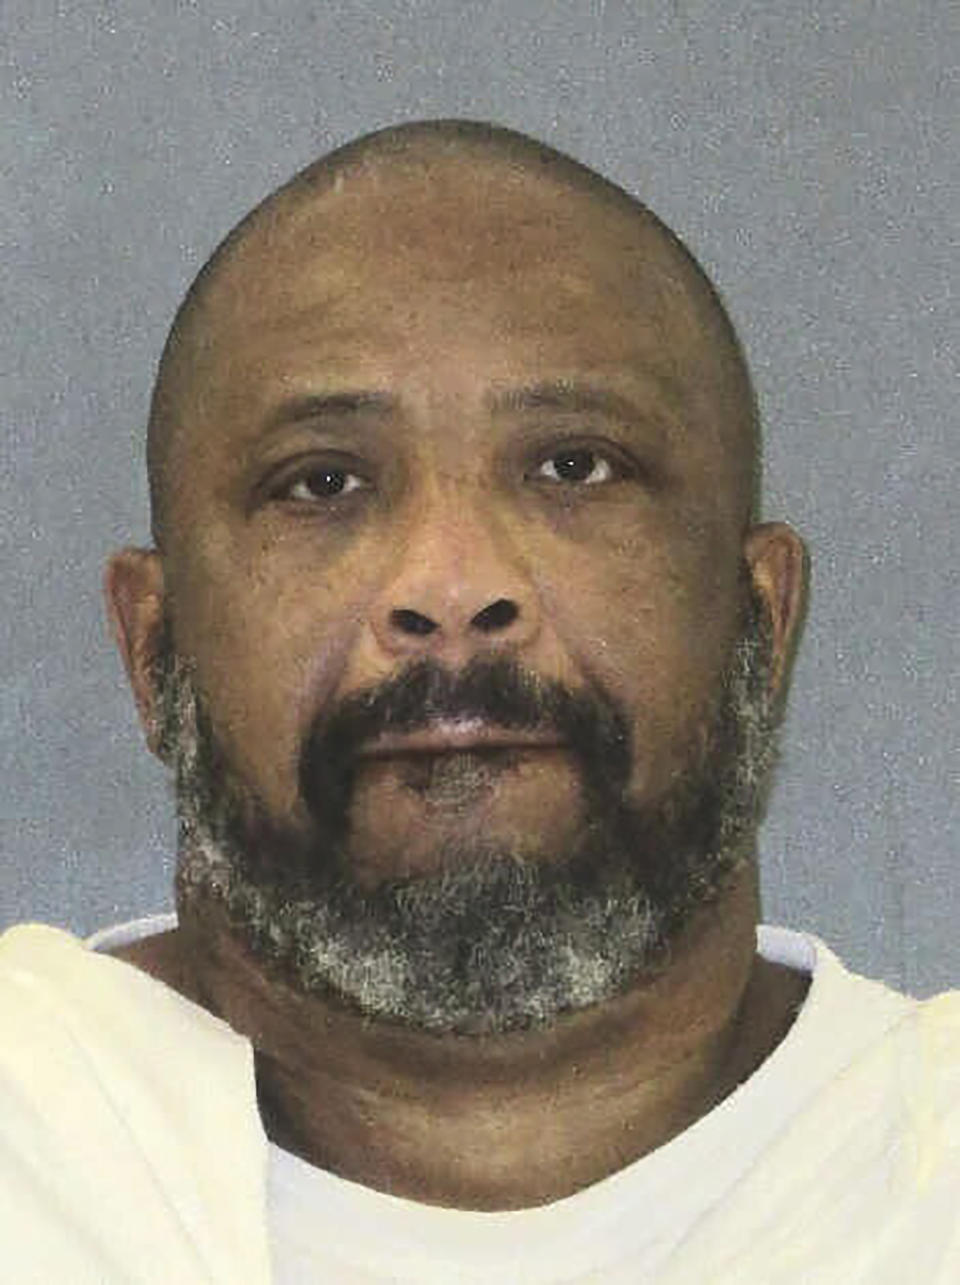 This photo provided by the Texas Department of Criminal Justice shows inmate Gary Green. Green is facing execution for fatally stabbing his estranged wife and drowning her 6-year-old daughter in a bathtub in September 2009. (Texas Department of Criminal Justice via AP)